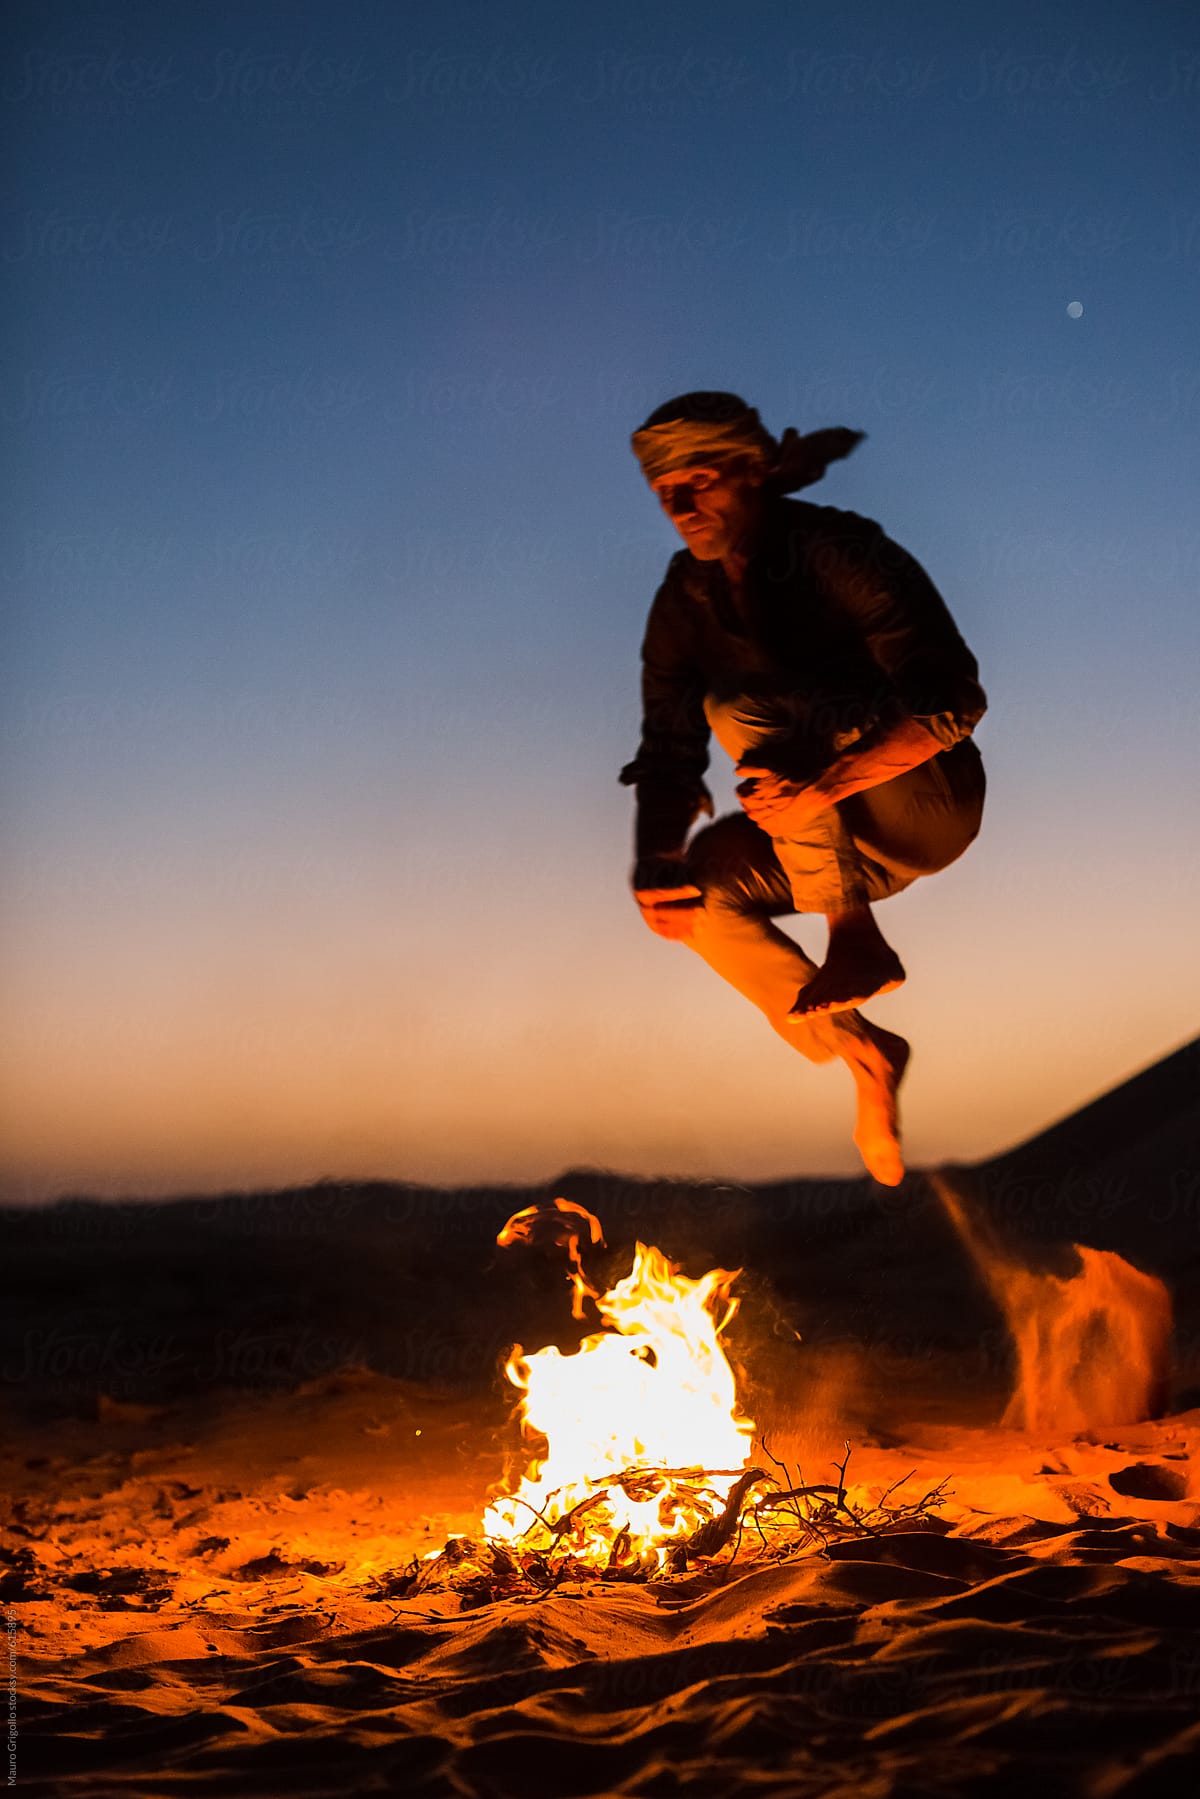 "Man Jumping Over A Fire Camp" by Stocksy Contributor "Mauro Grigollo